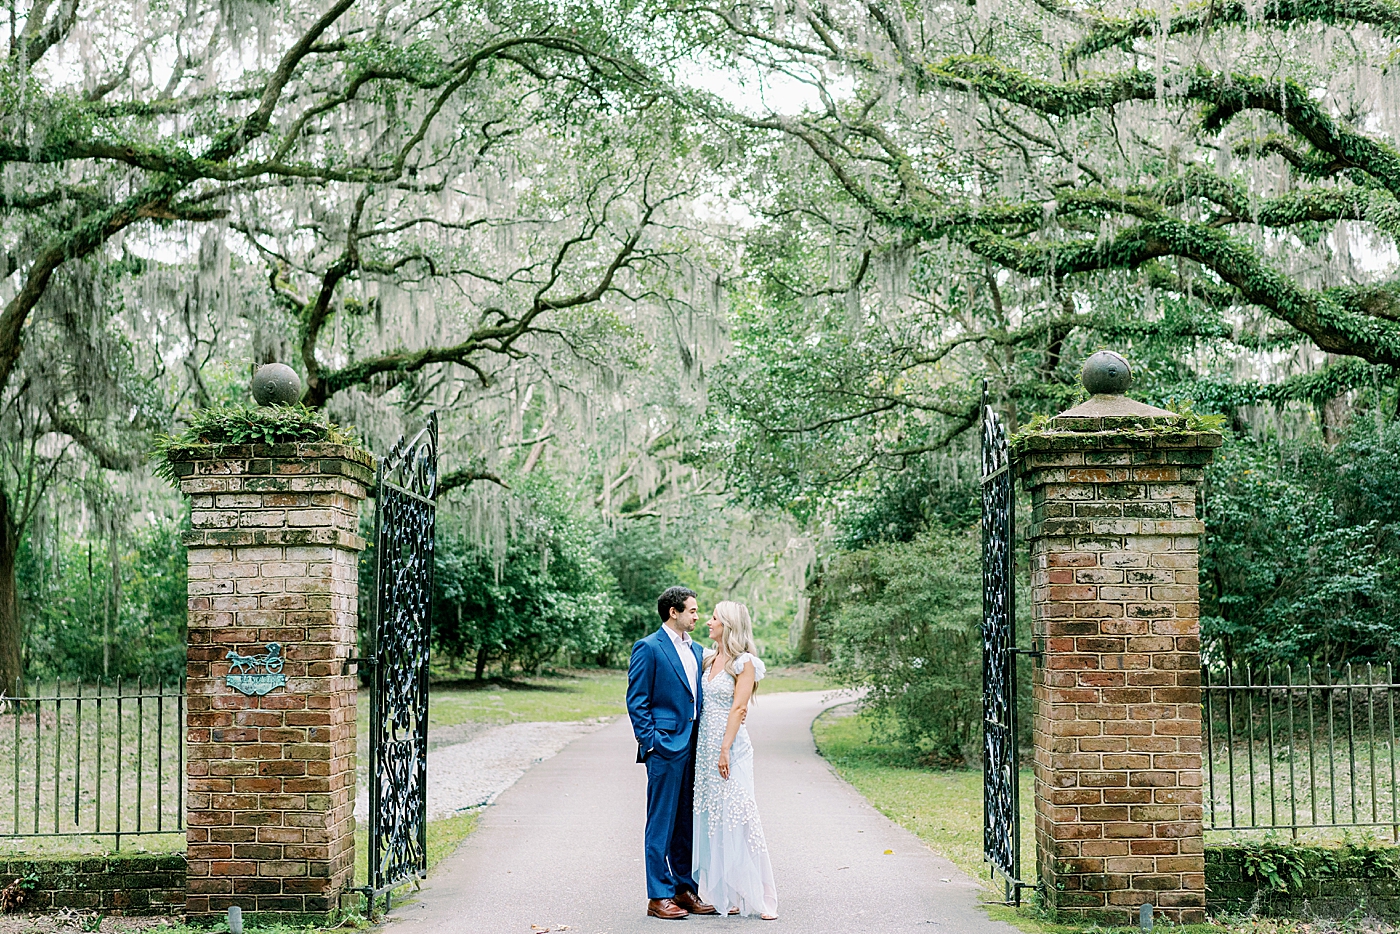 Couple standing near an iron gate | Image by Annie Laura Photo